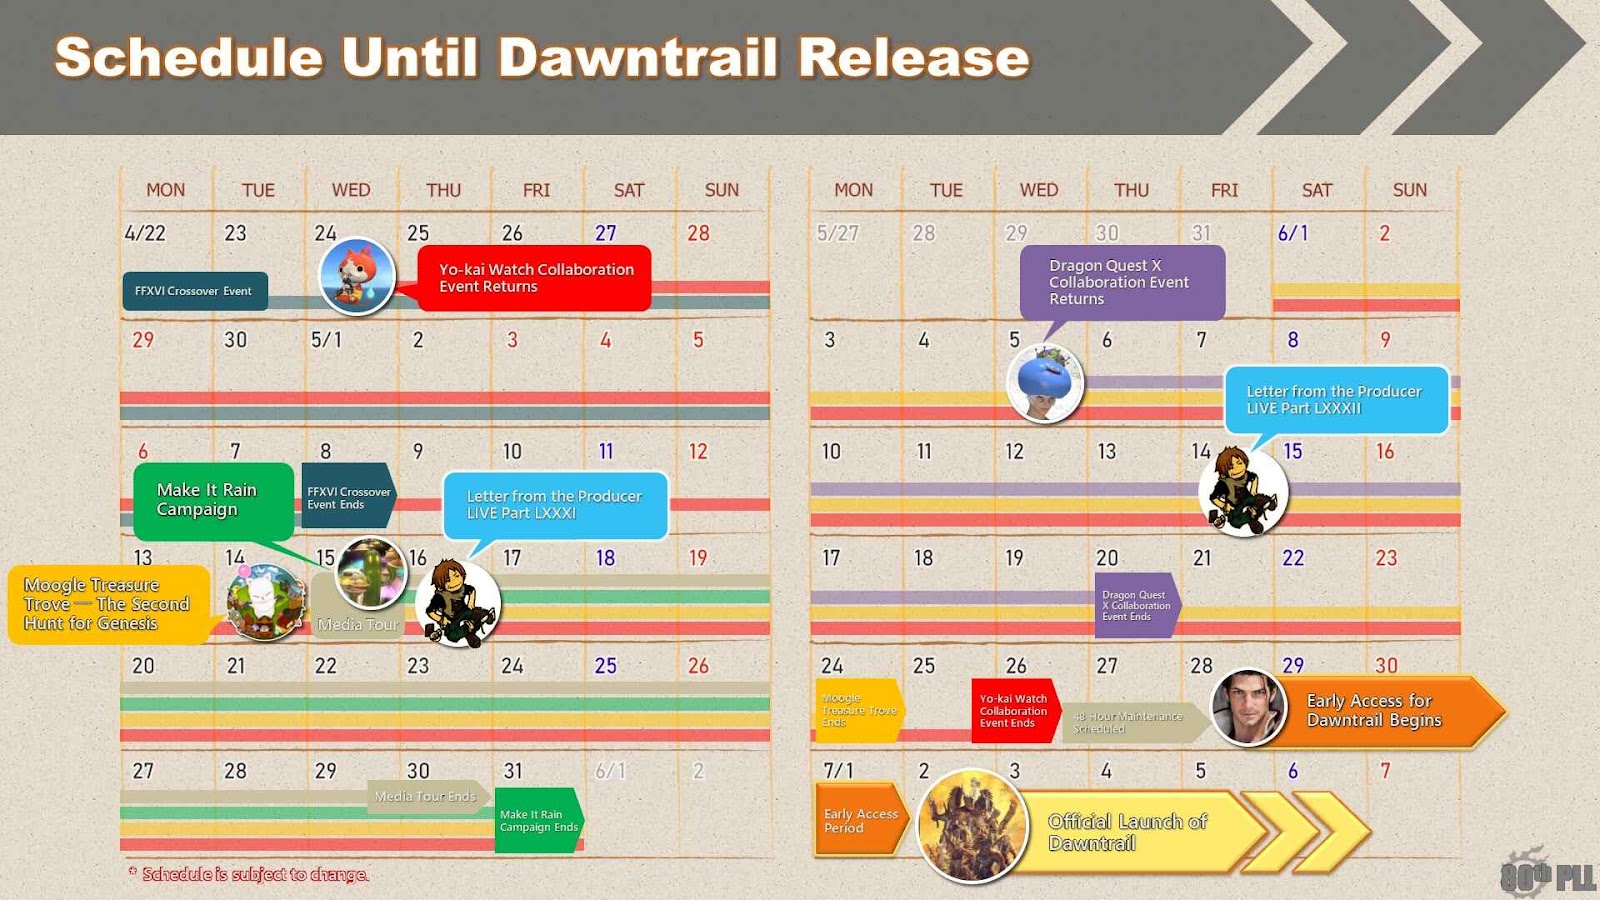 Final Fantasy 14: Complete events timeline and schedule before Dawntrail’s release